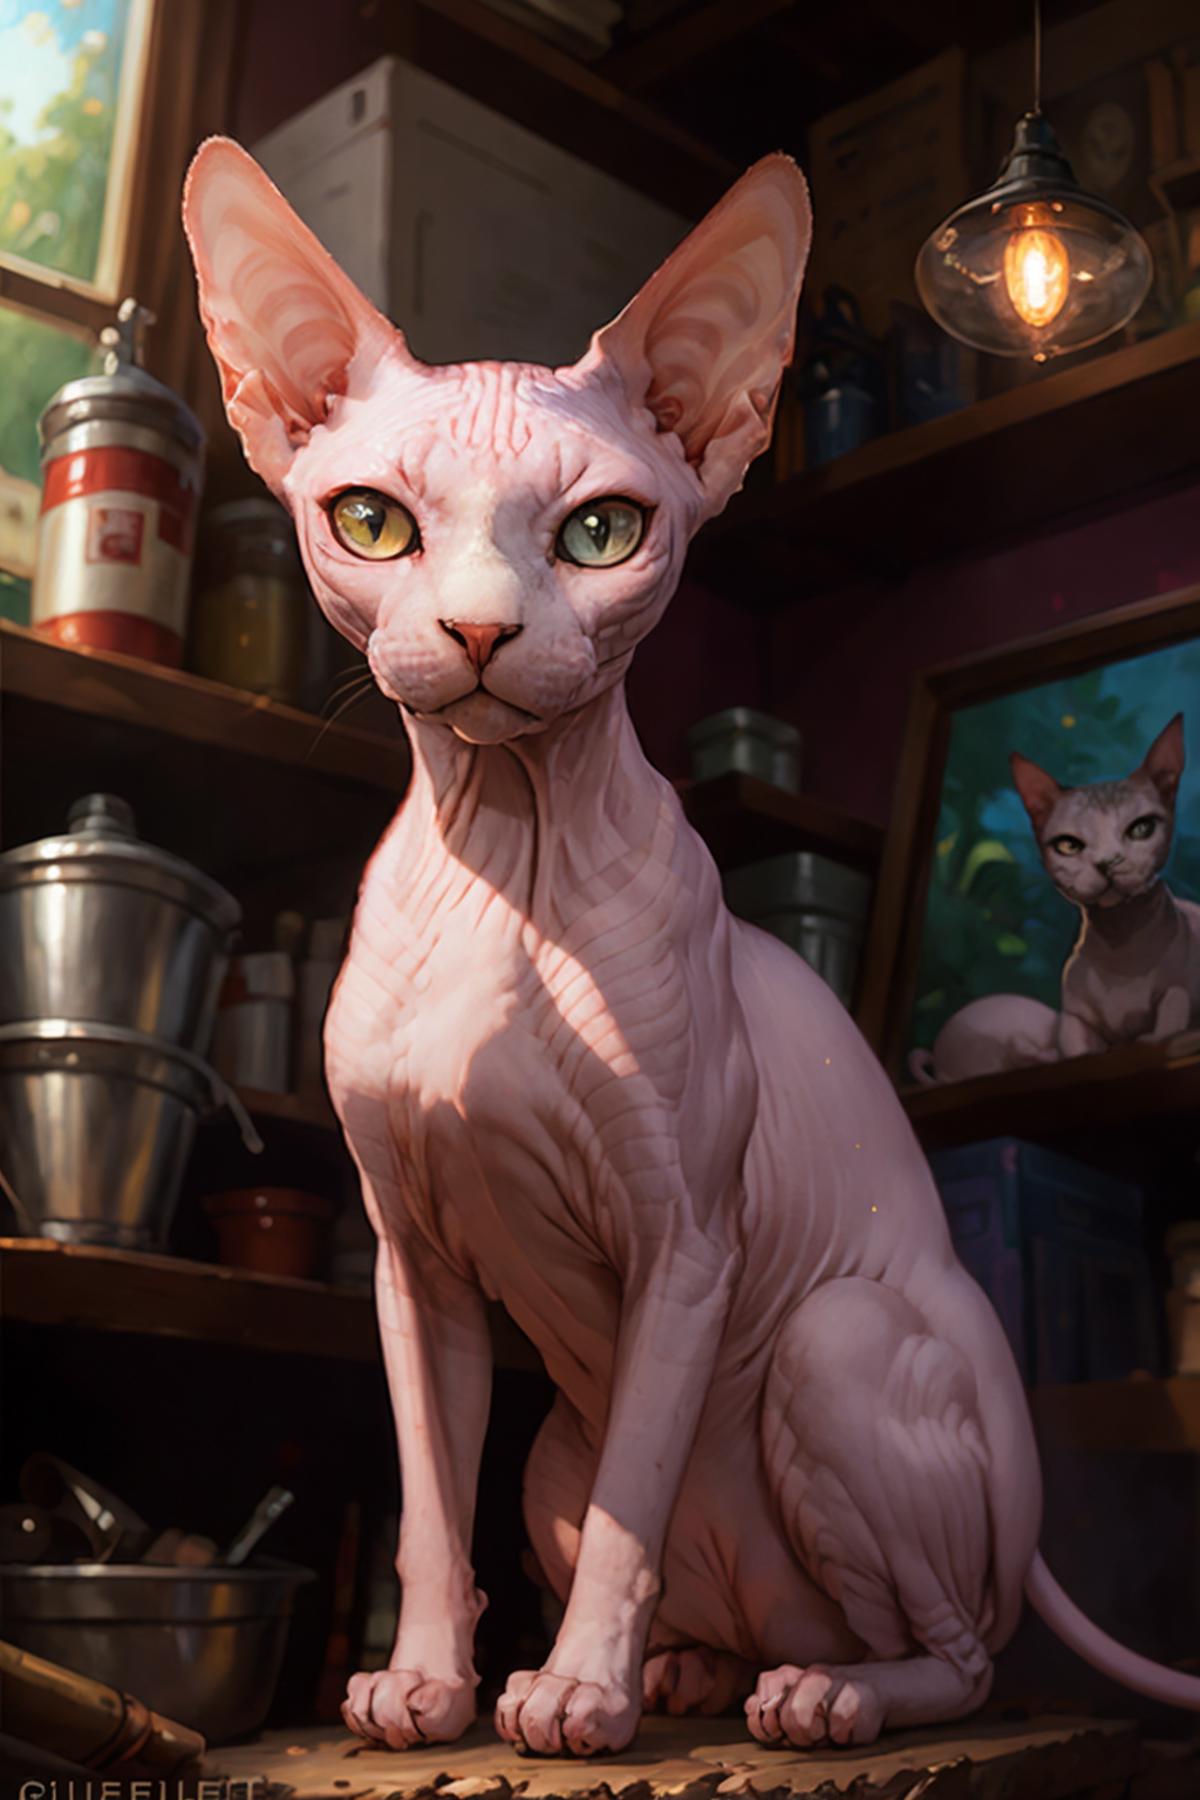 IronCatLoRA #5 - Sphynx Cats image by AstroTibs